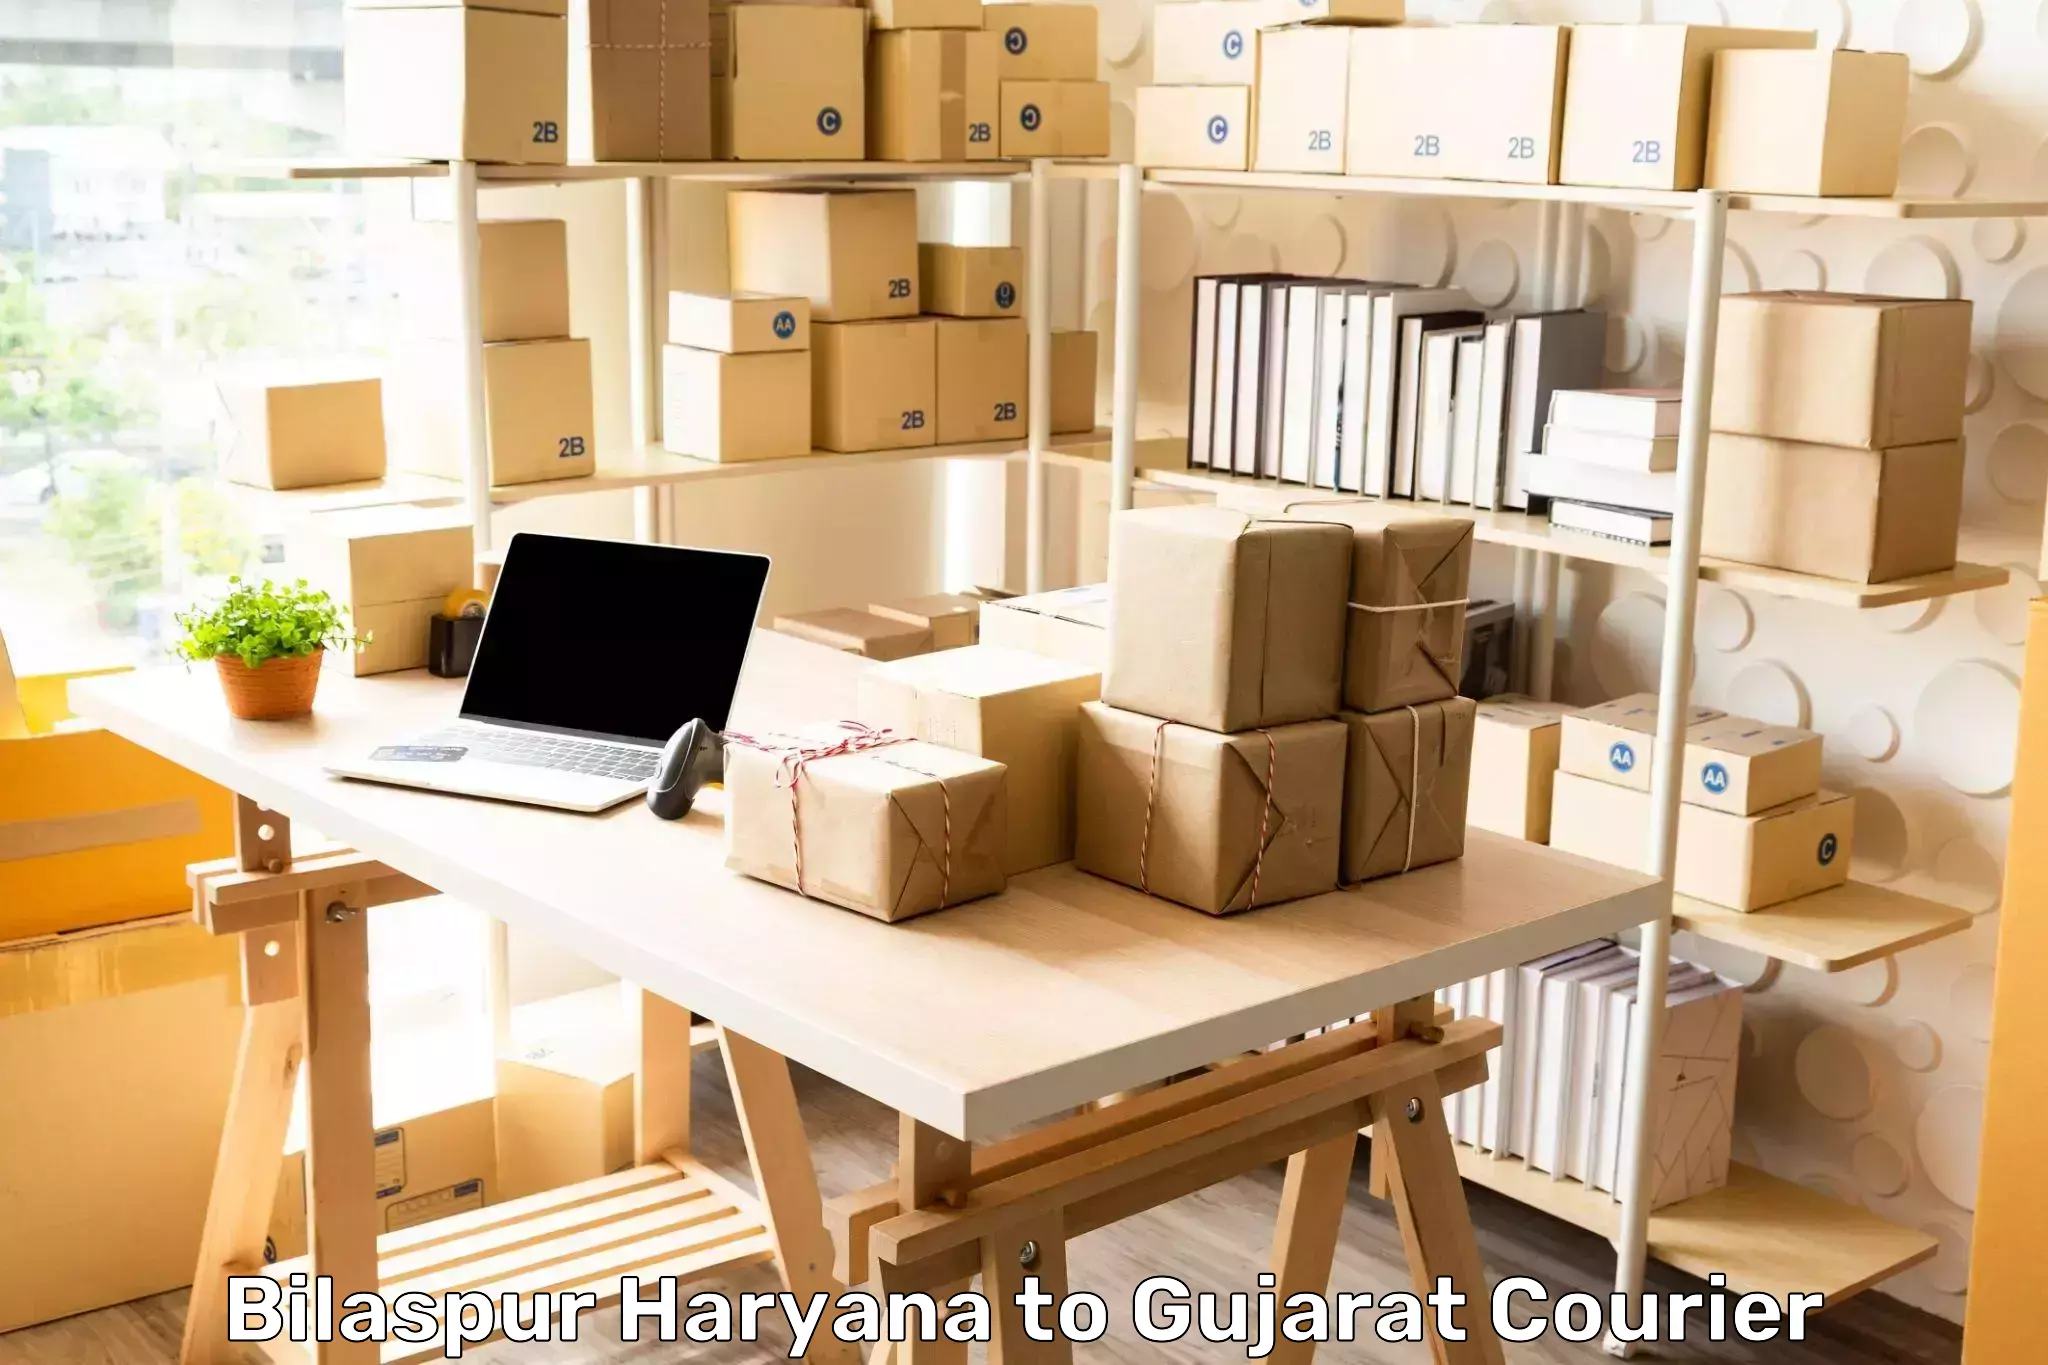 Same-day delivery solutions Bilaspur Haryana to Palitana